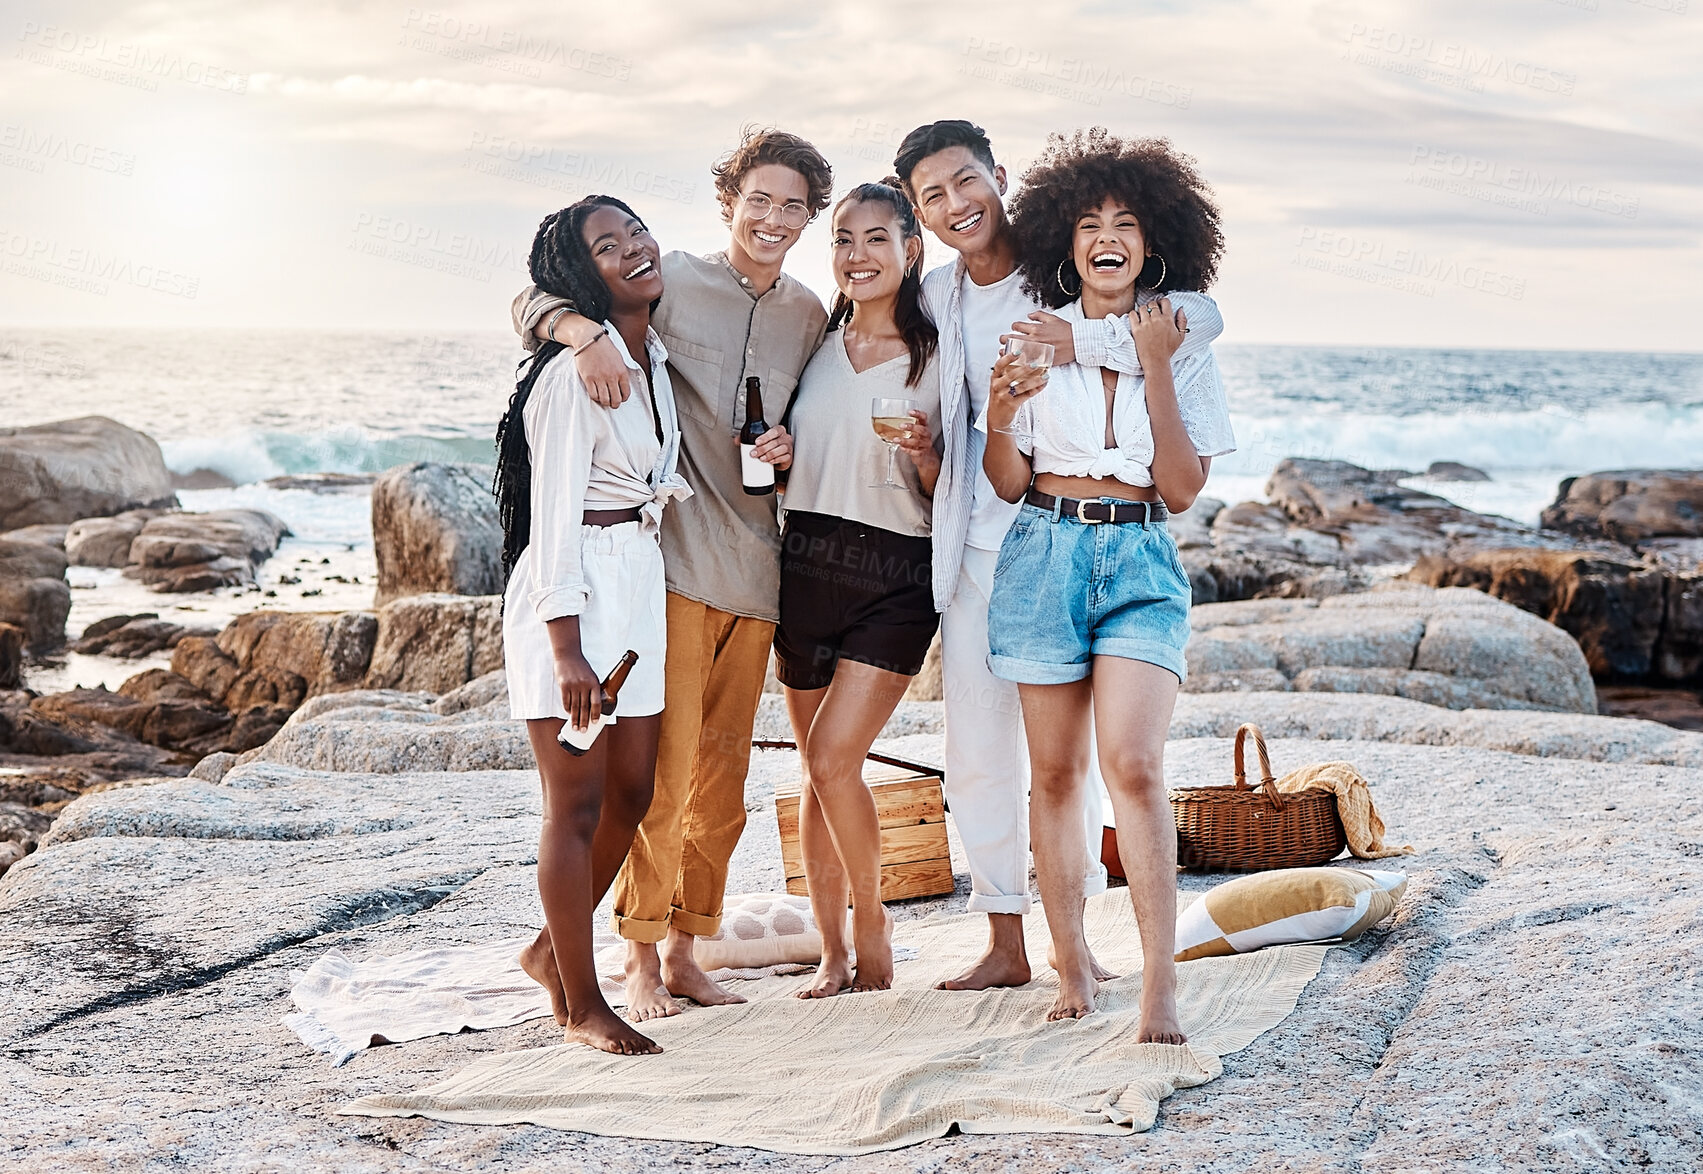 Buy stock photo Portrait of a group of friends enjoying their time together and celebrating with some alcoholic drinks at the beach